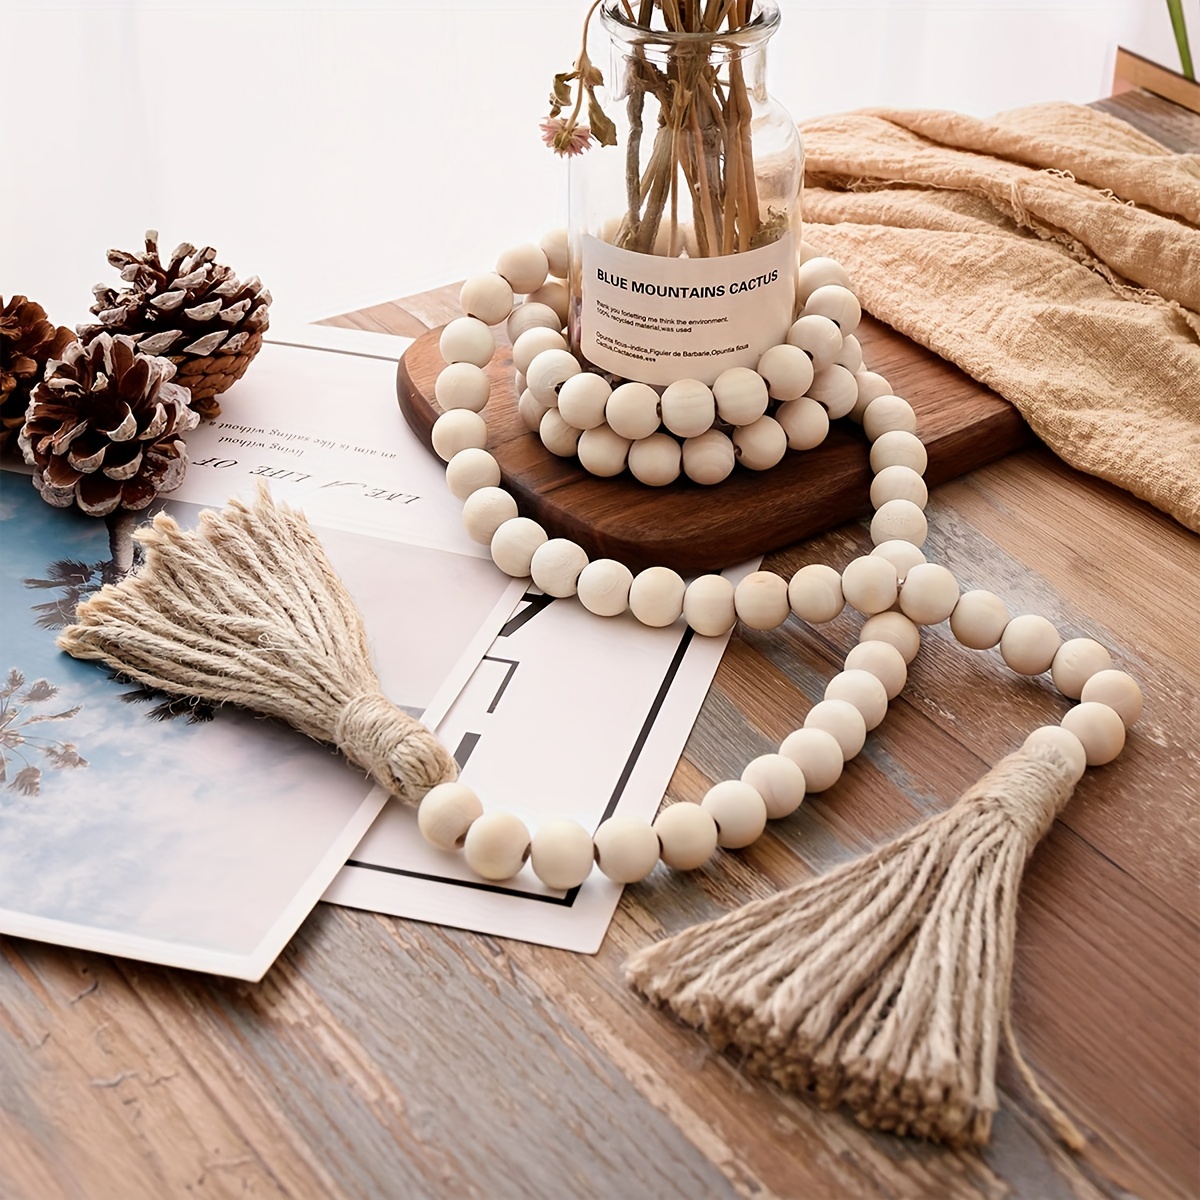 Large Wood Bead Garland with 1.6 Diameter Wooden Beads and